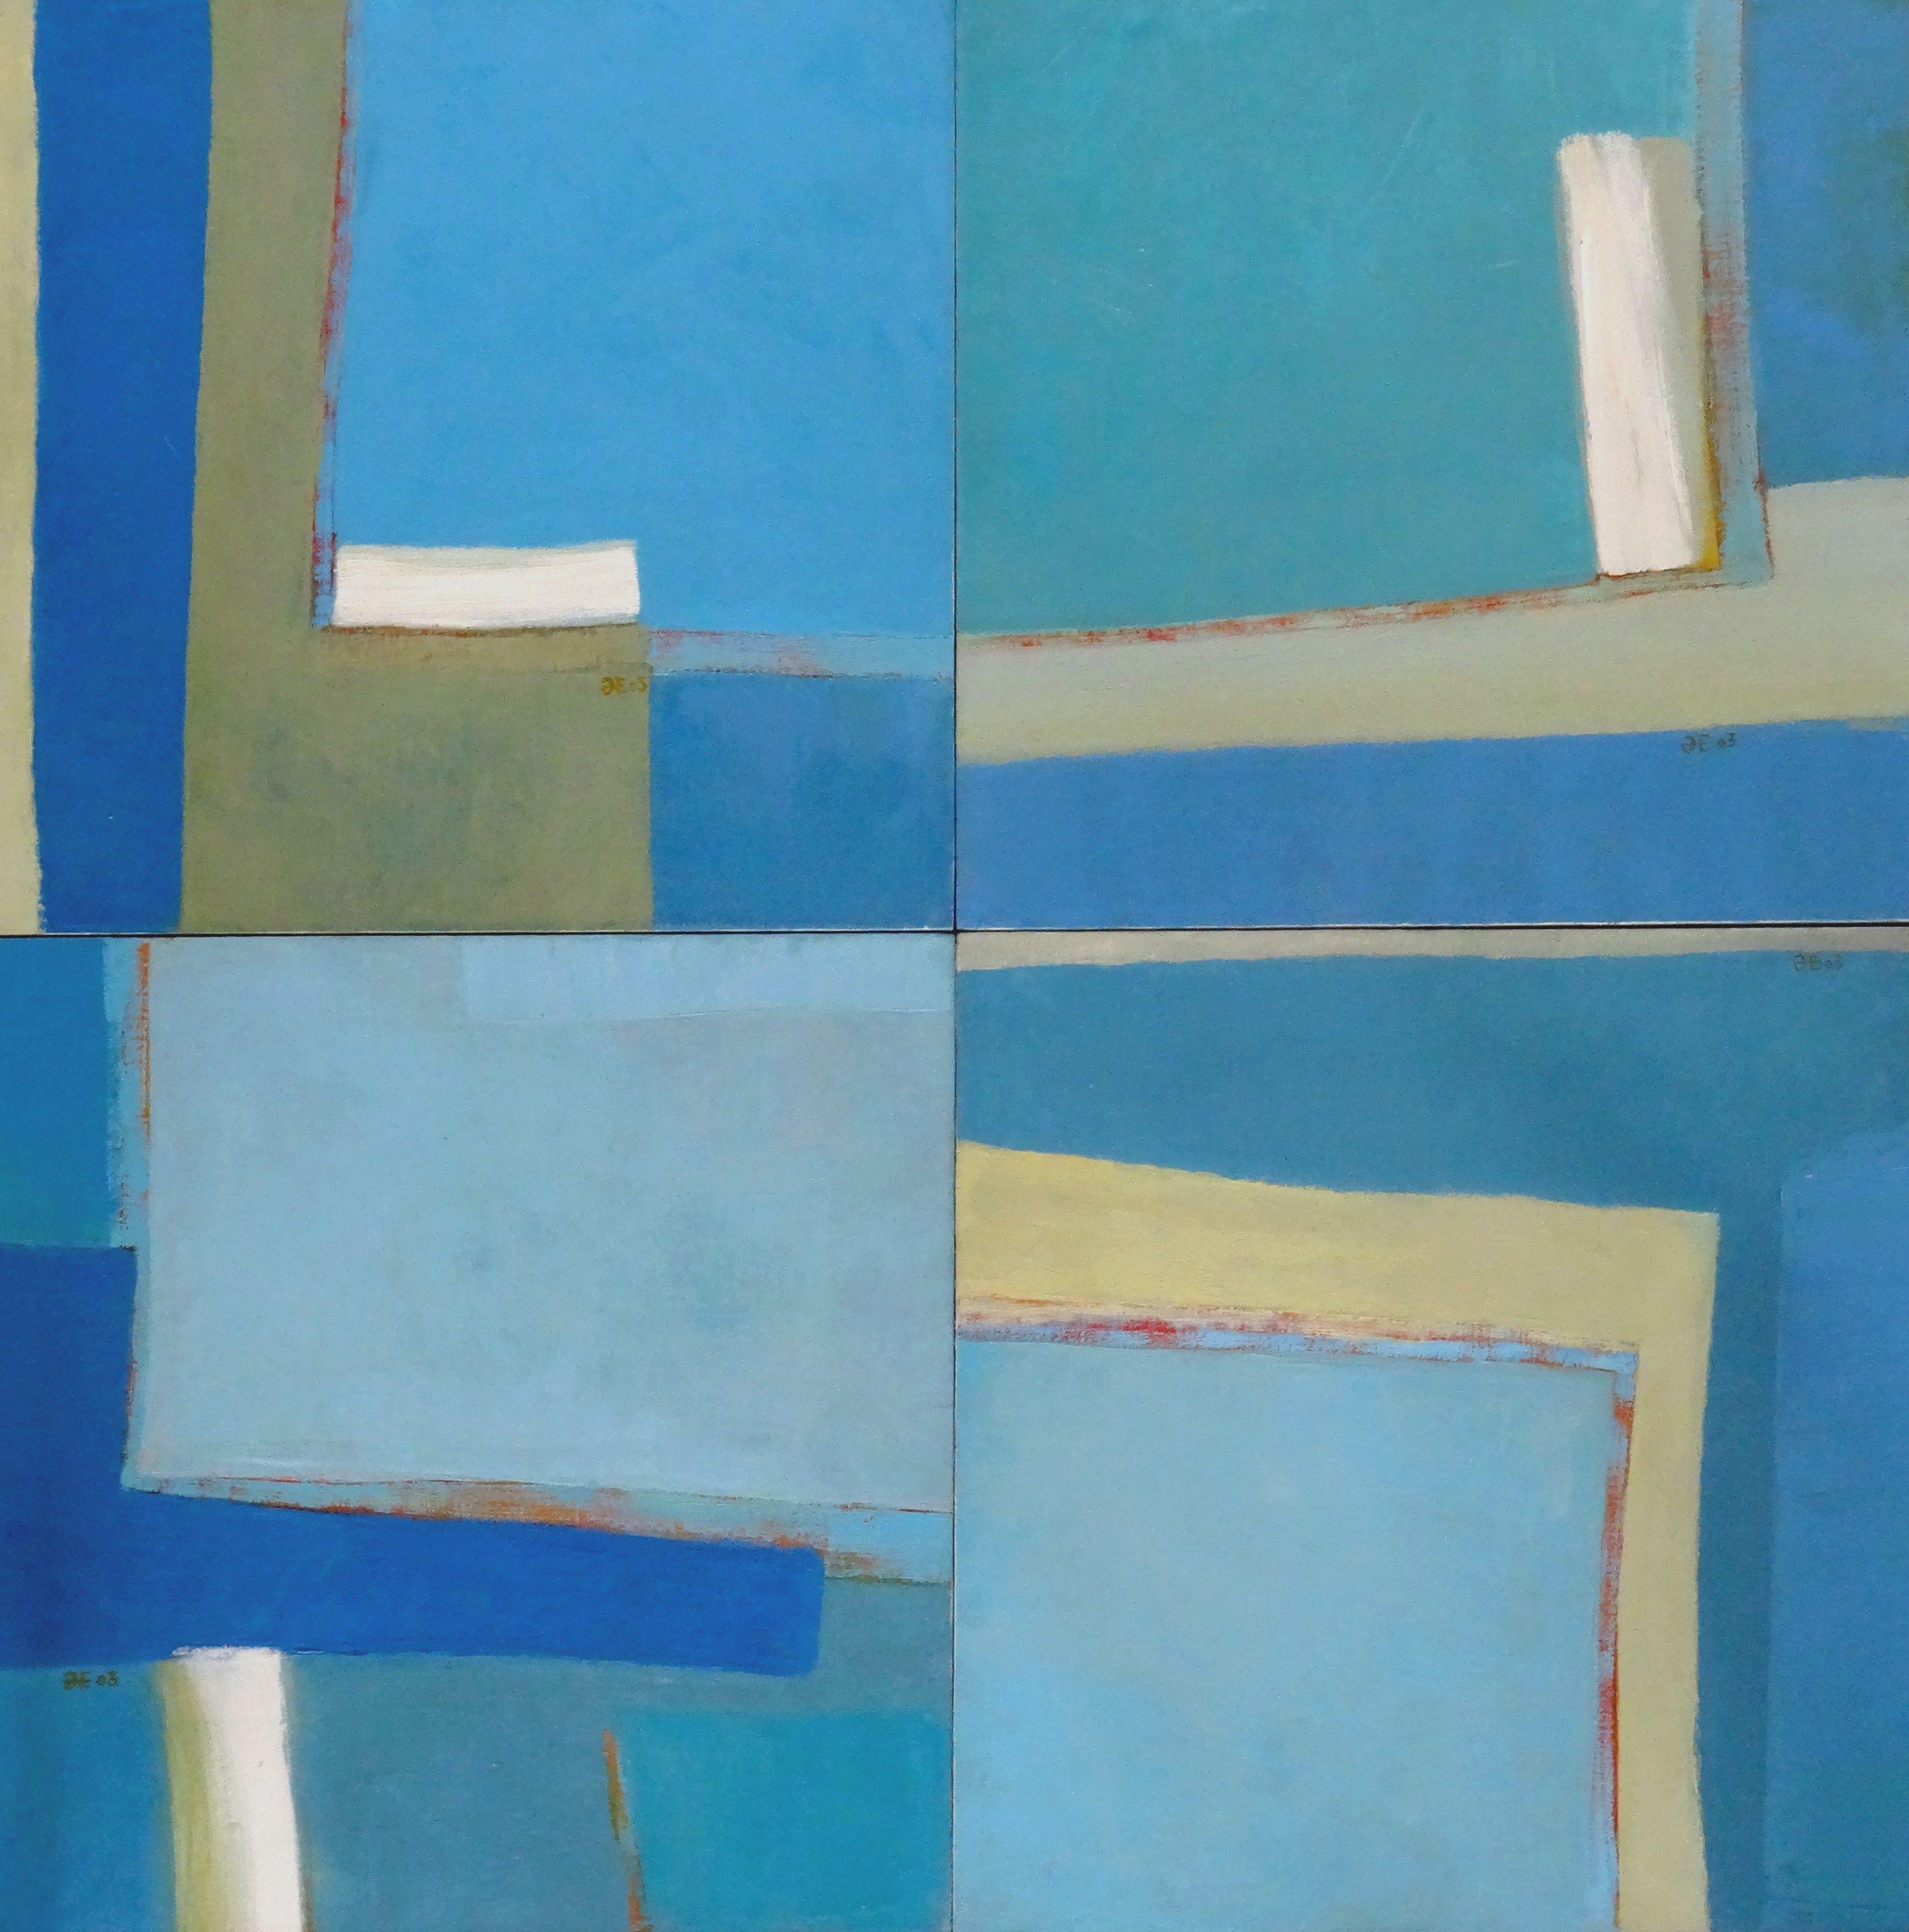 Sky directions. 2003, modular painting, 5 parts - Painting by Elga Grinvalde